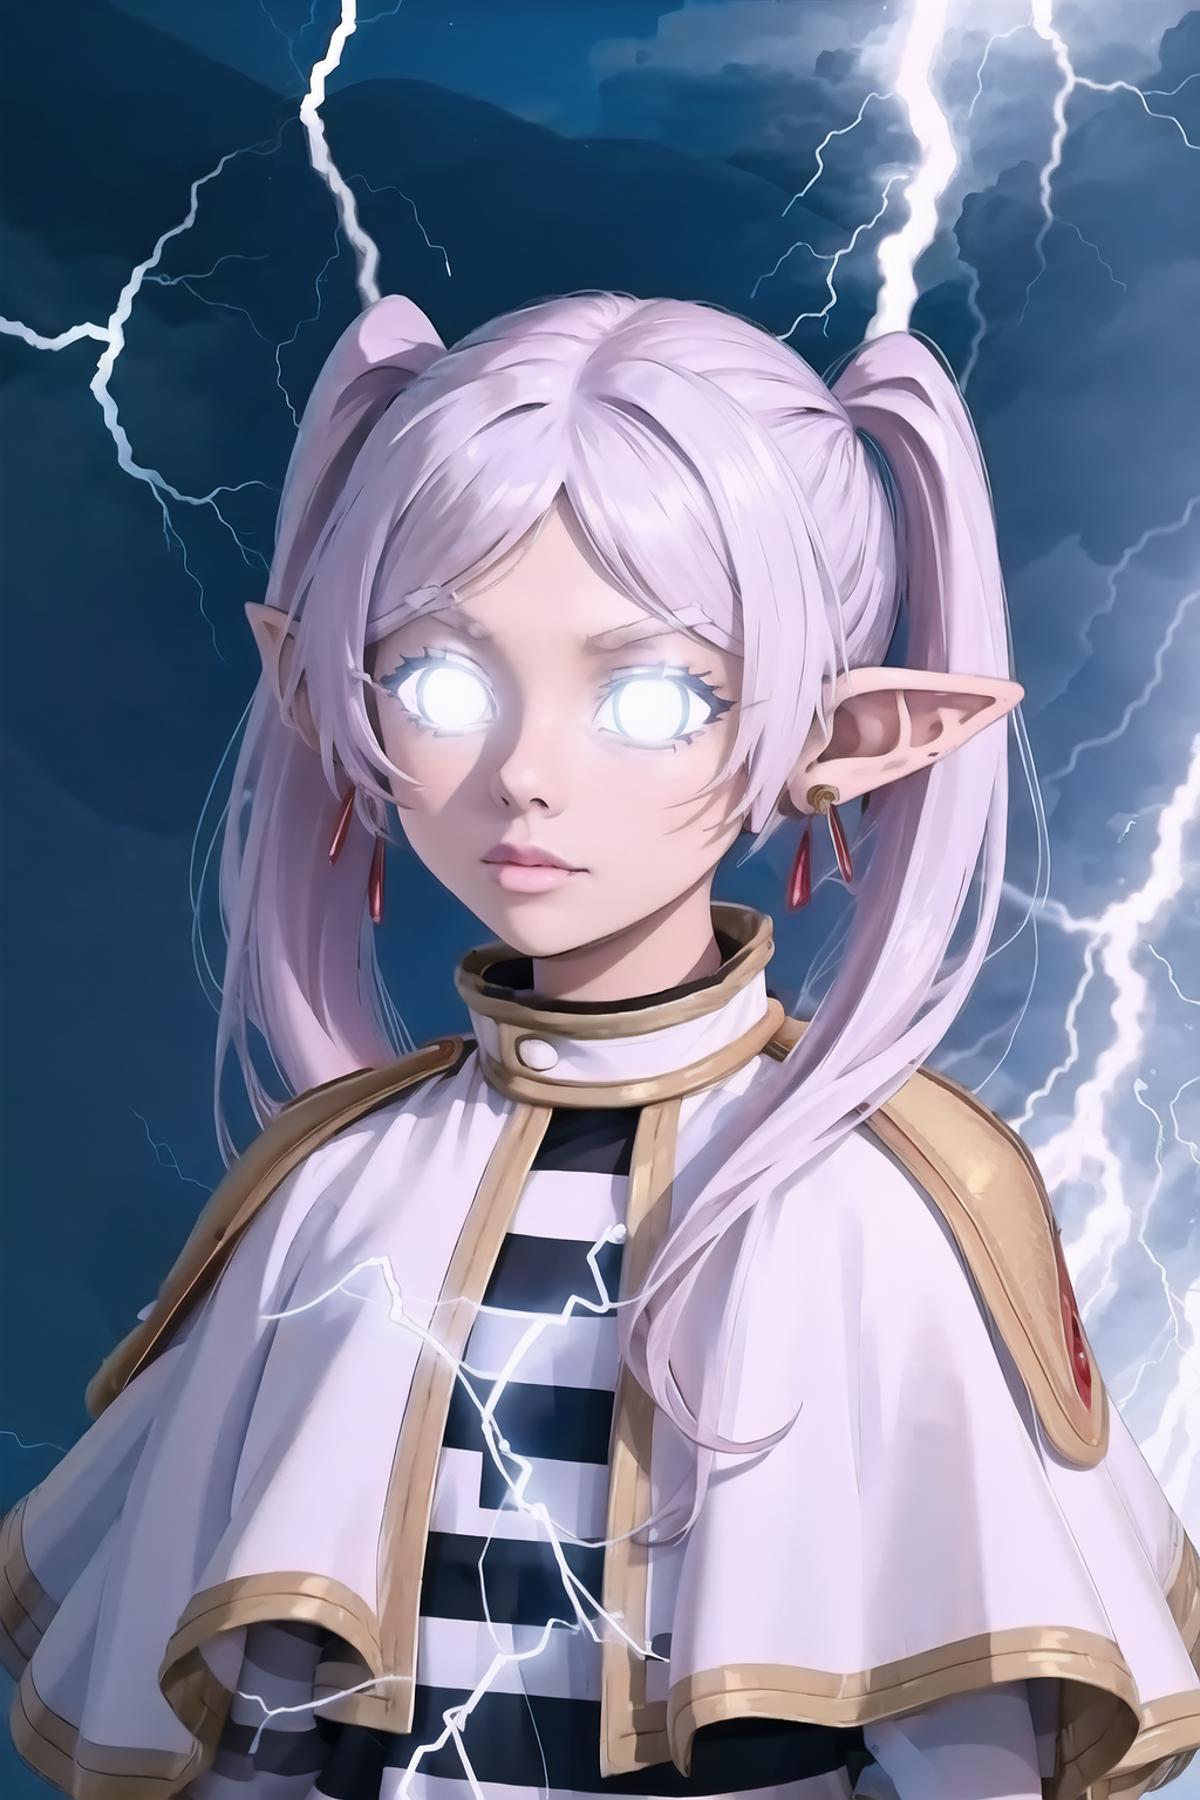 A fantasy character with lightning in the background.